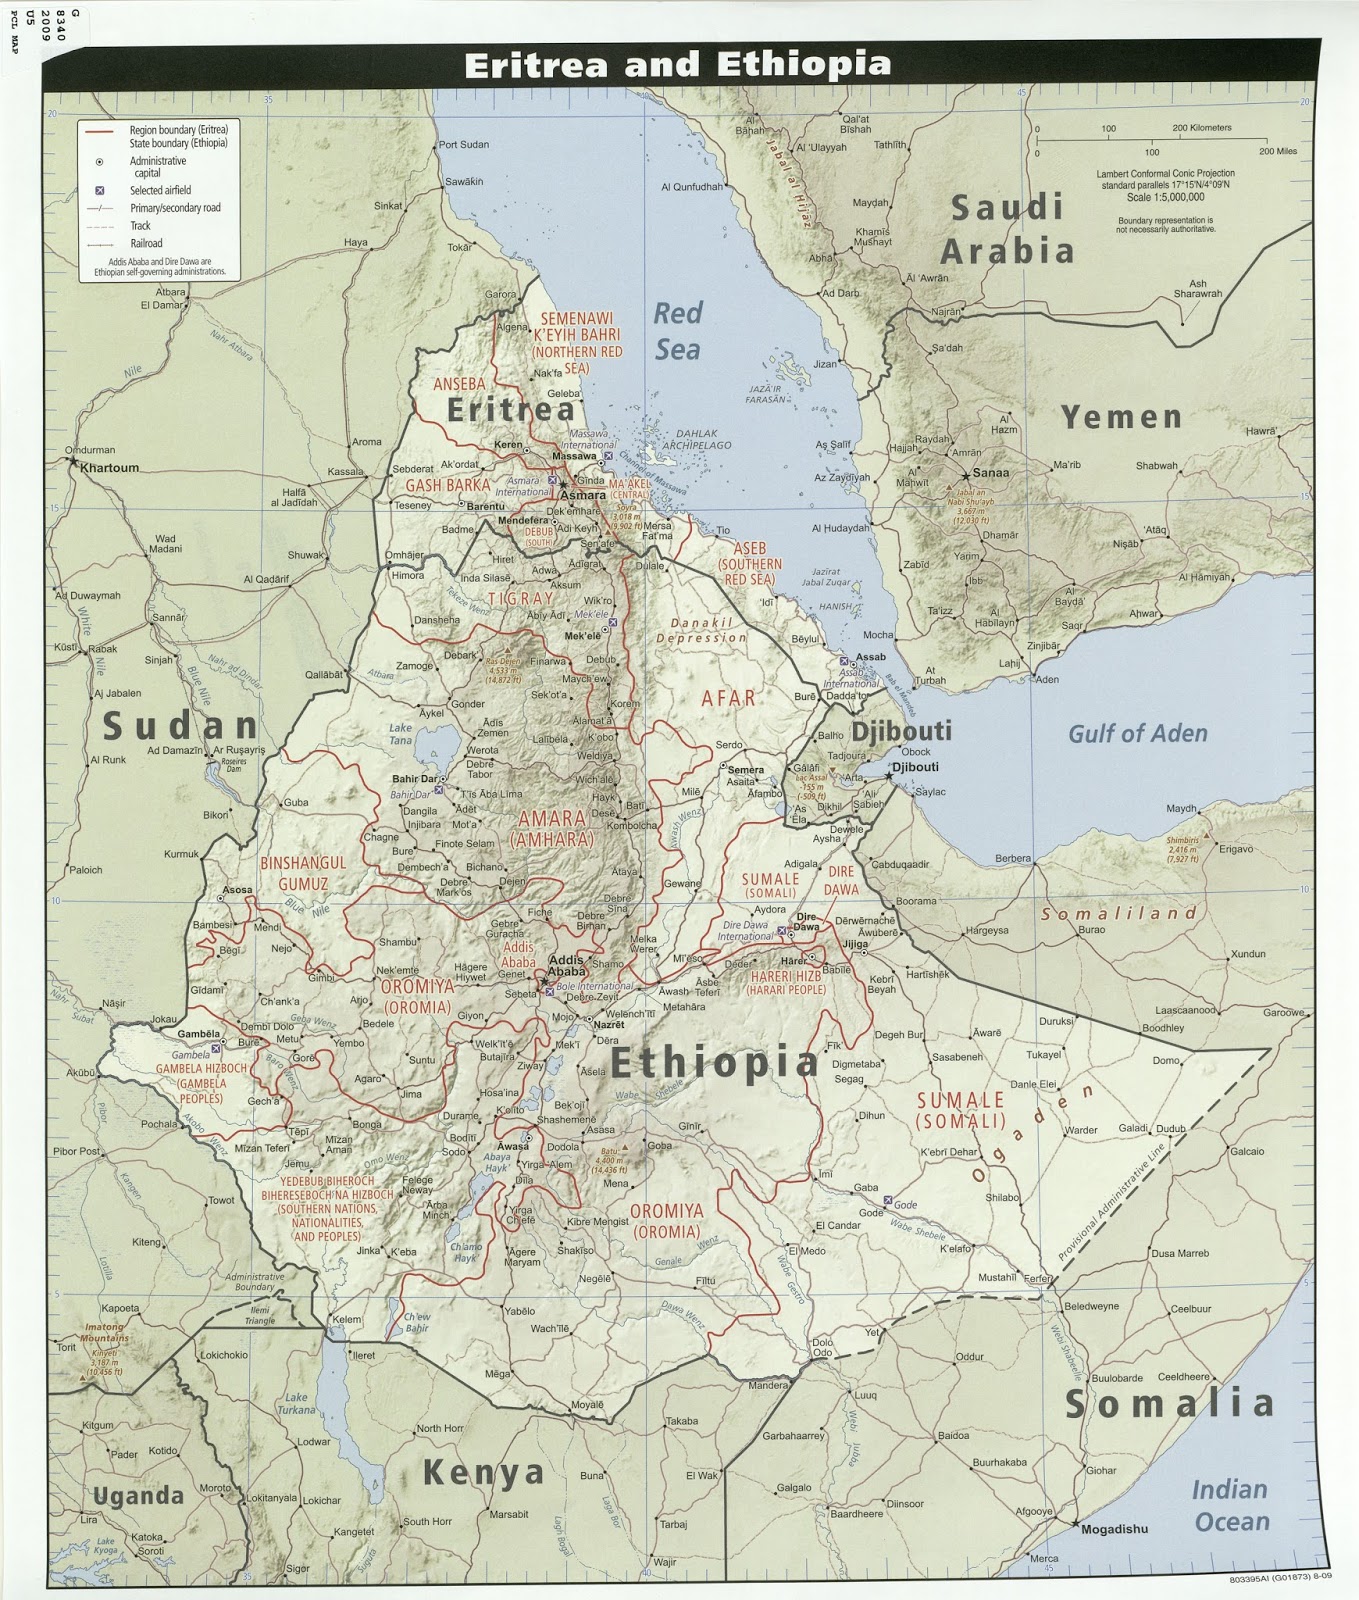 Maps of Ethiopia Kenya Reunion Island Available from Ball State University Libraries